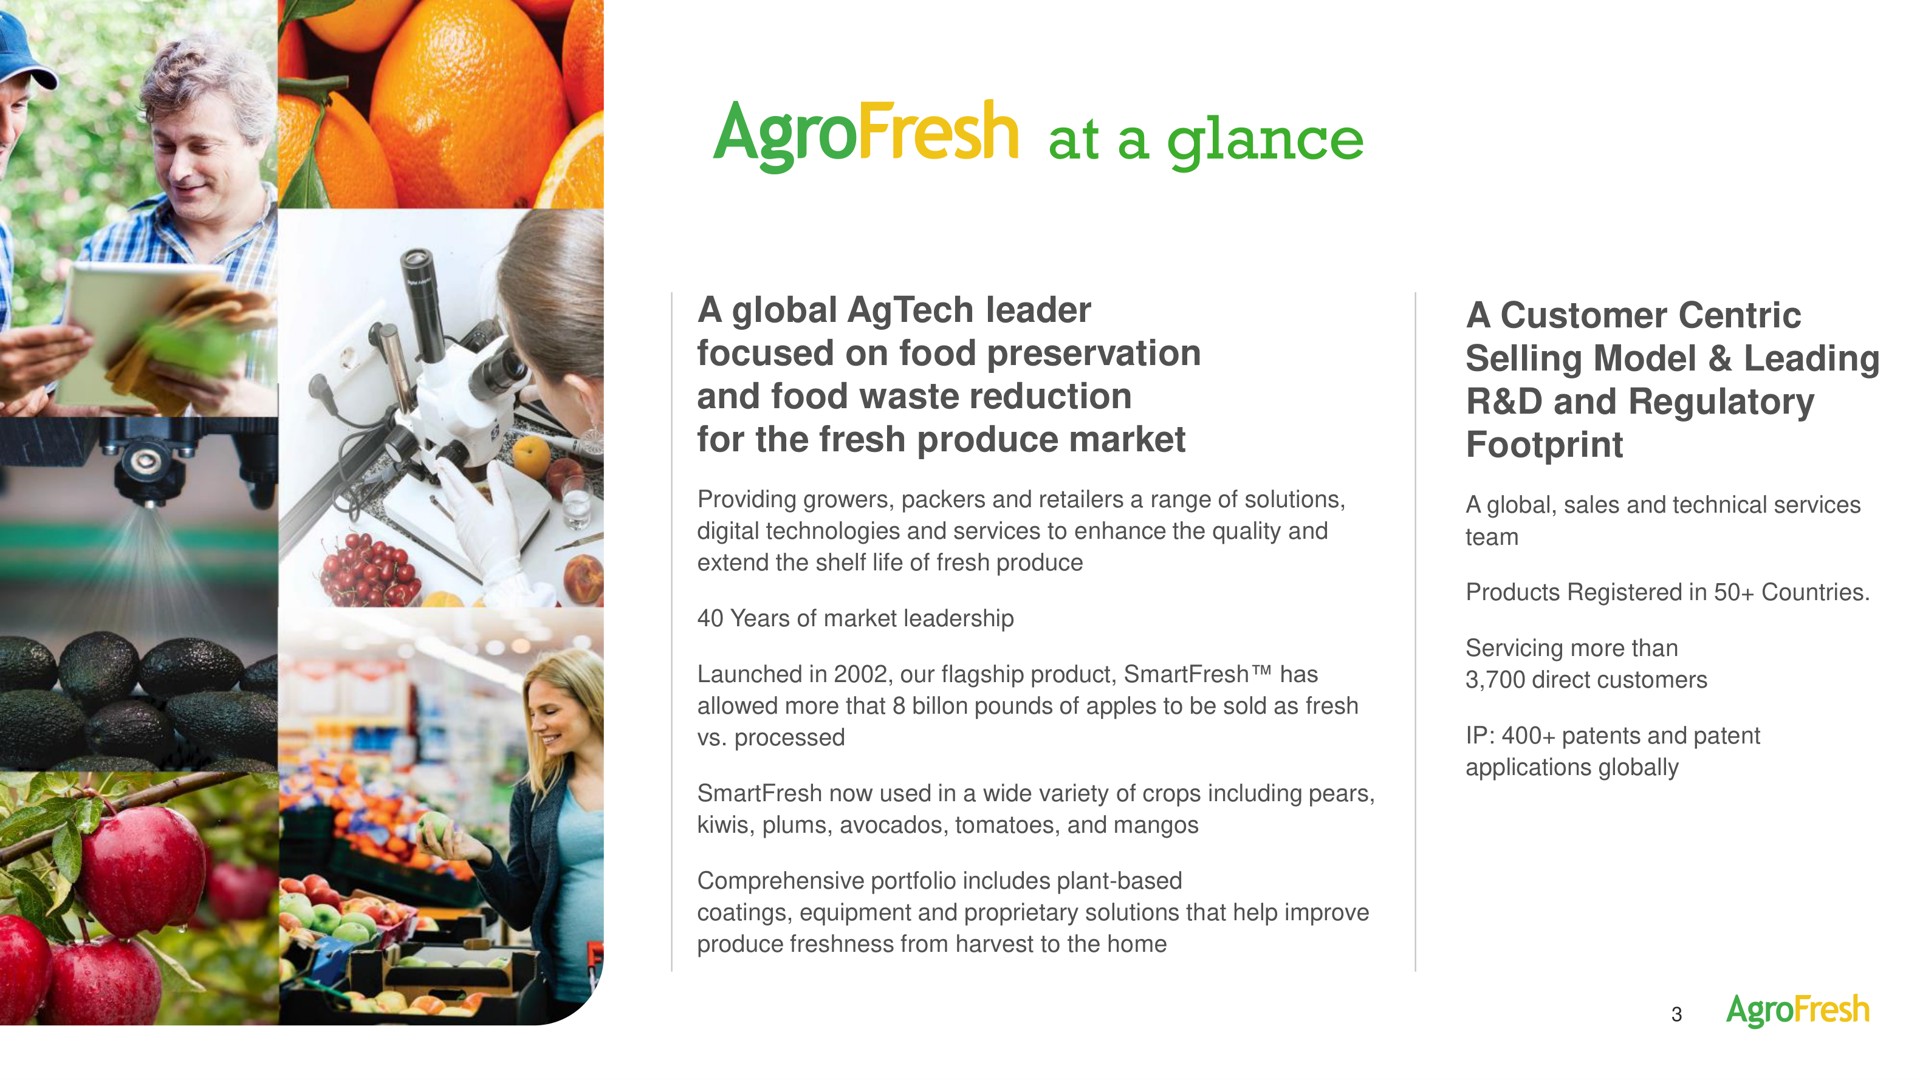 at a glance global leader focused on food preservation and food waste reduction for the fresh produce market customer centric selling model leading and regulatory footprint | AgroFresh